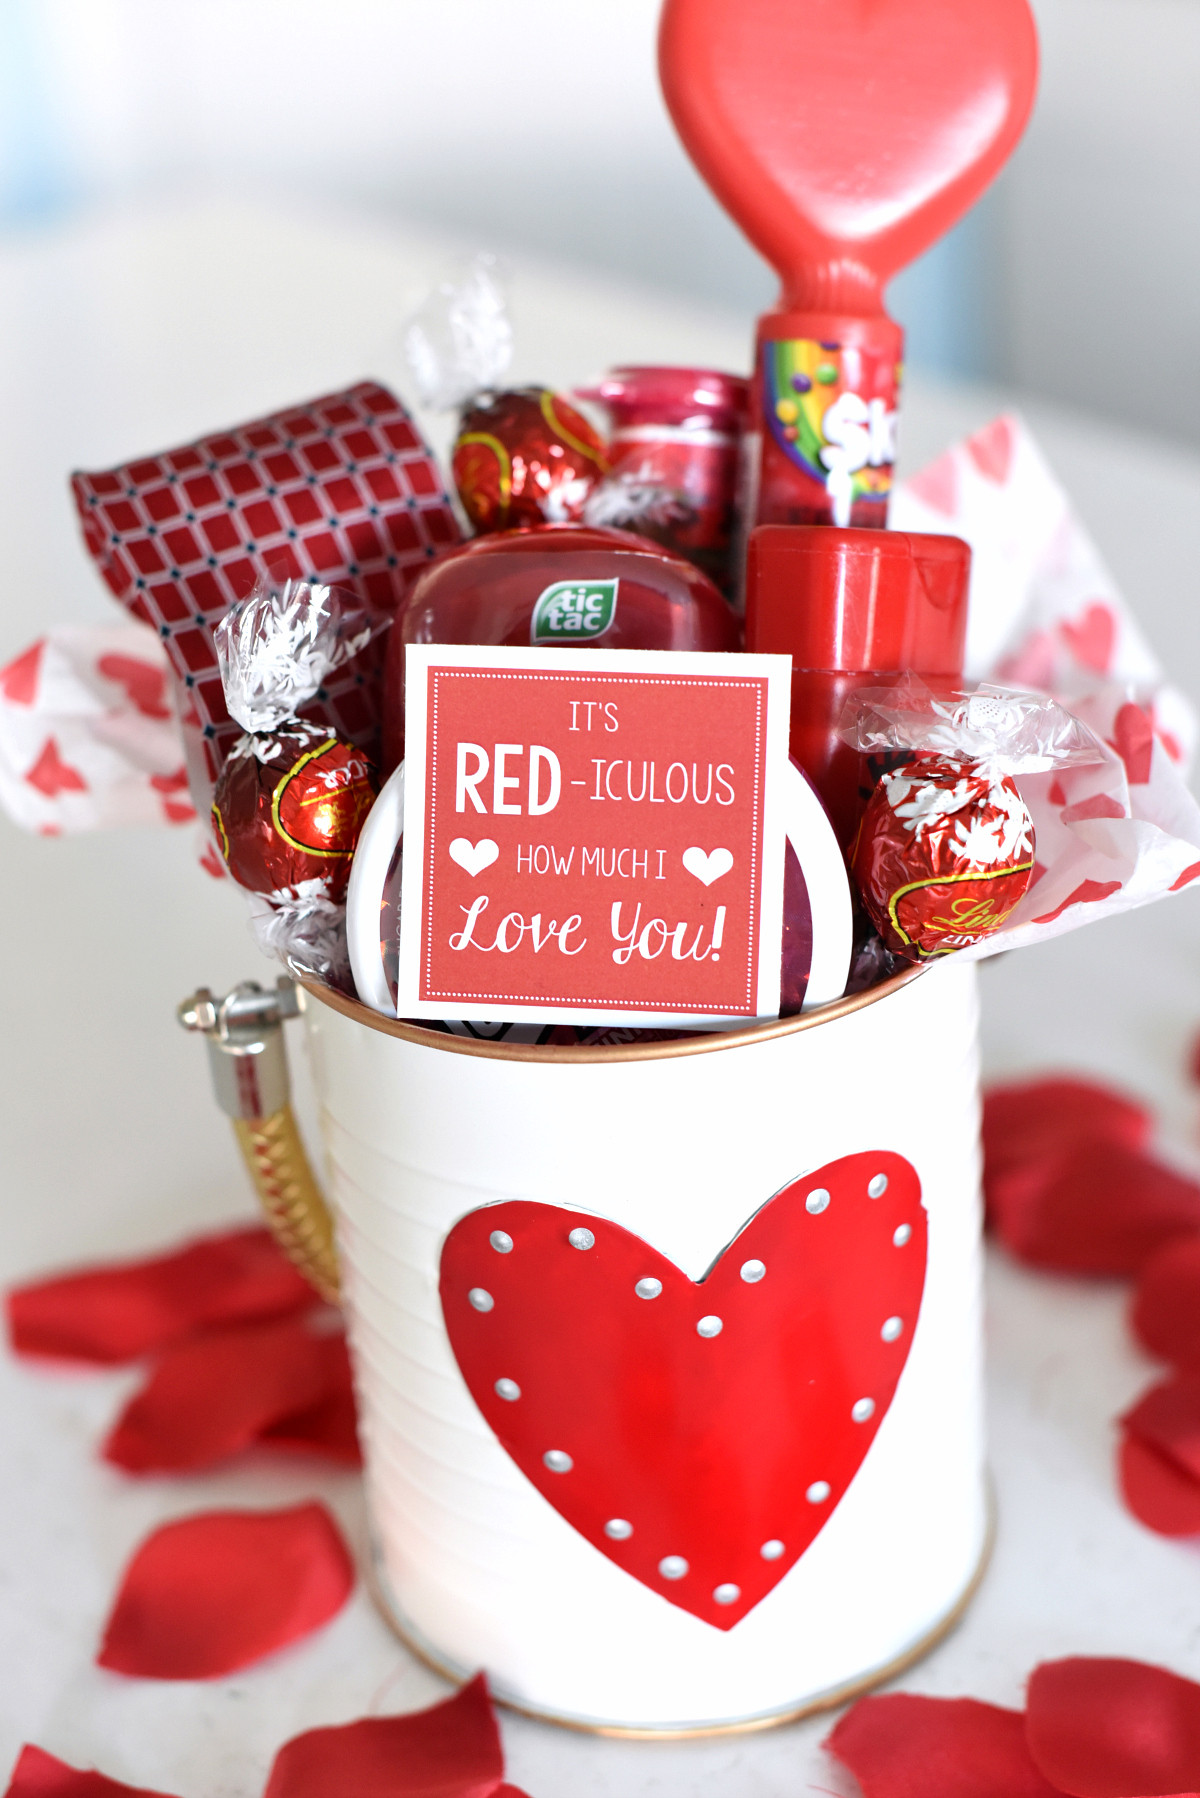 Valentines Day Gift Ideas
 Cute Valentine s Day Gift Idea RED iculous Basket